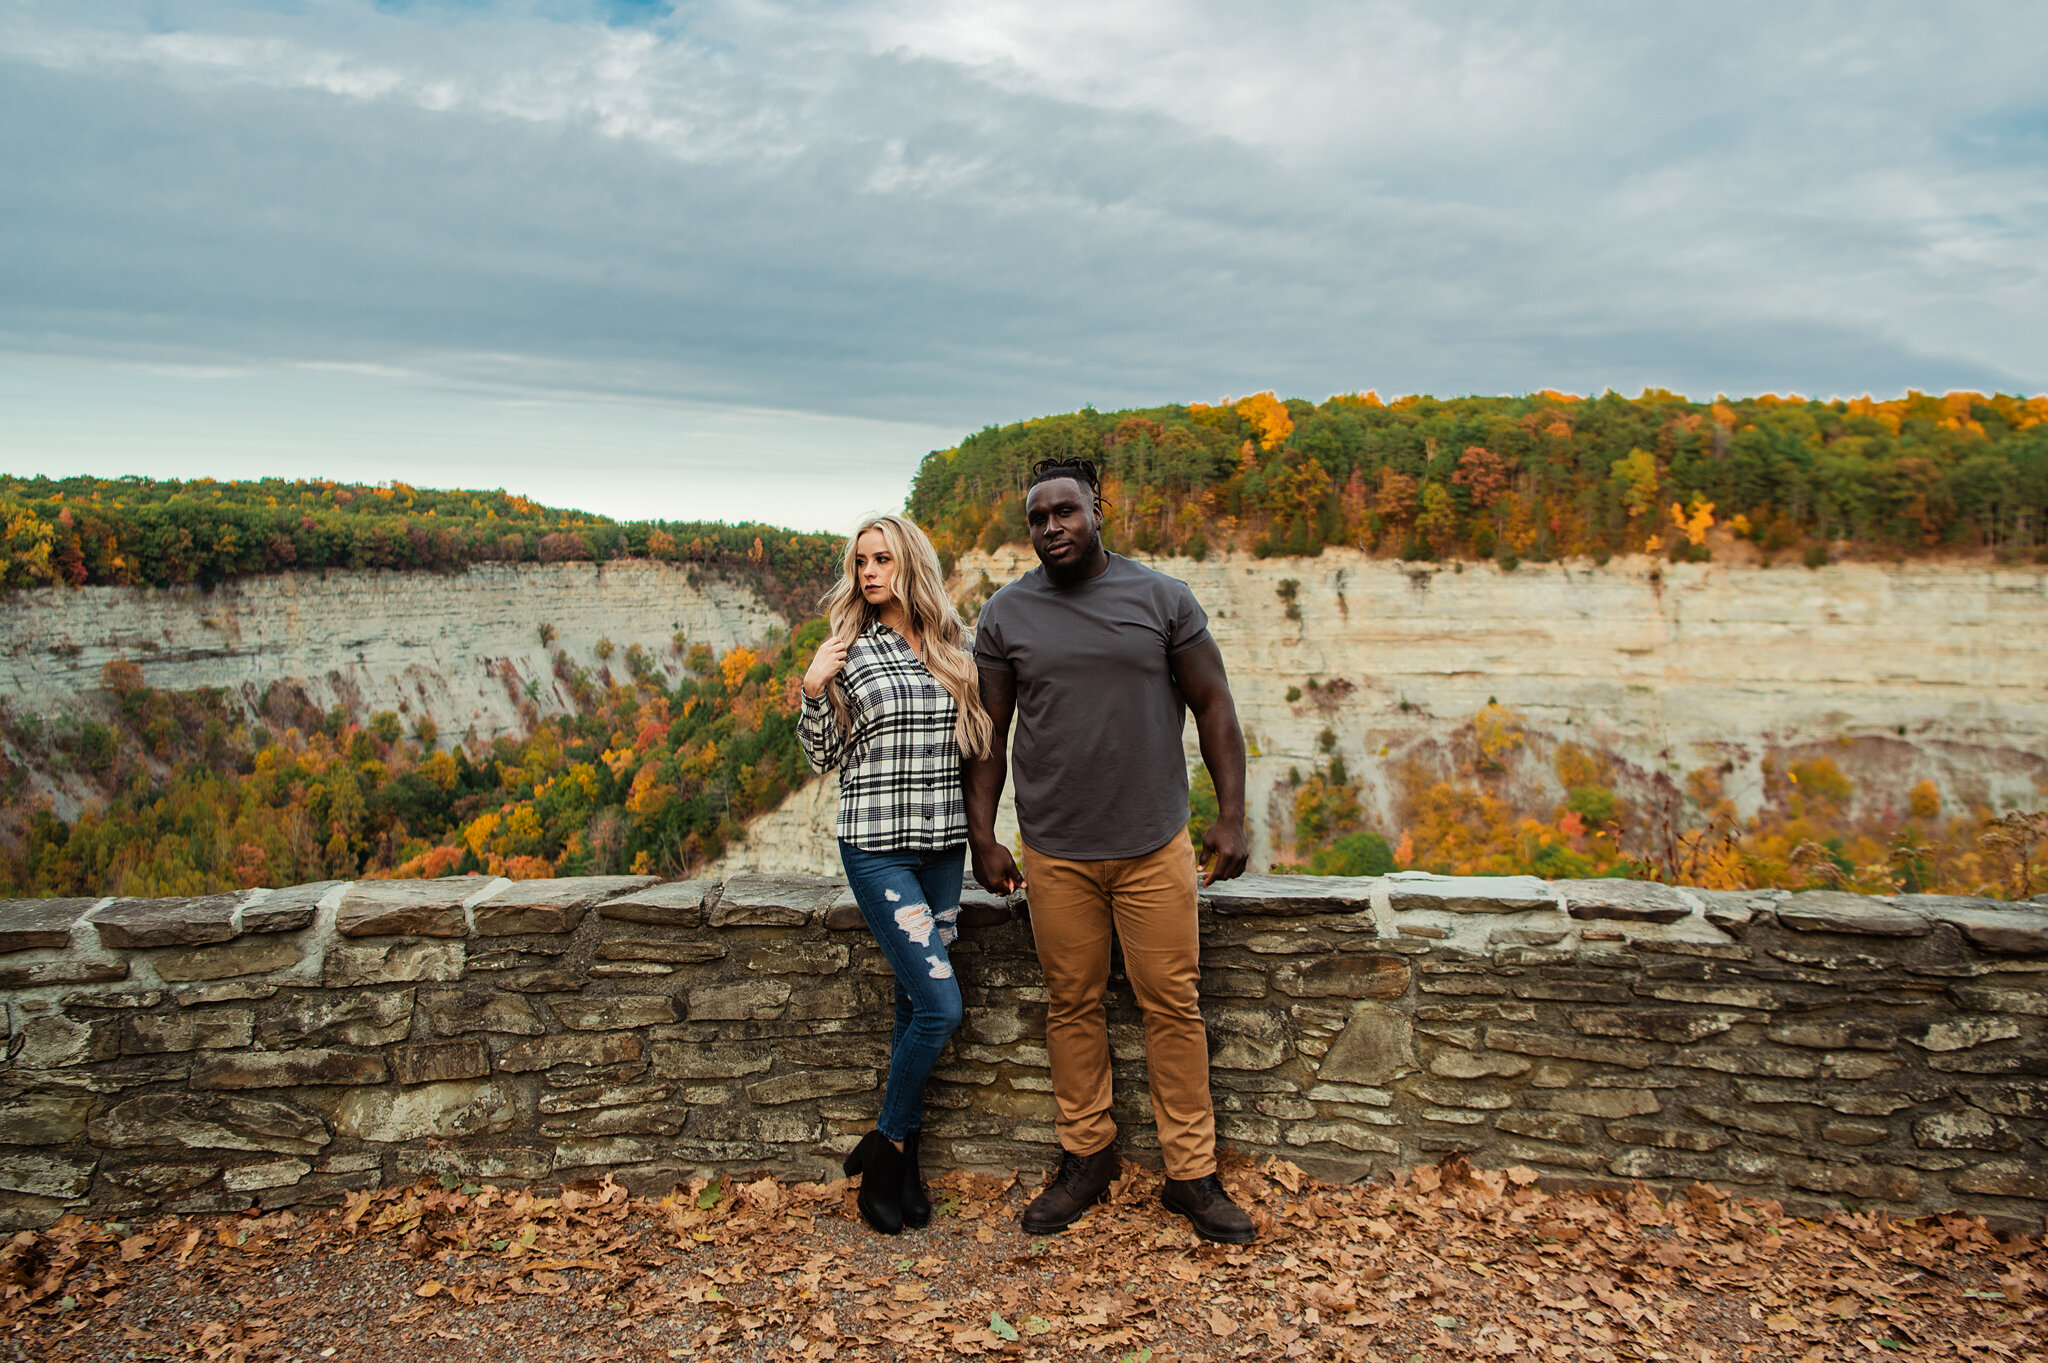 Letchworth_State_Park_Rochester_Couples_Session_JILL_STUDIO_Rochester_NY_Photographer_9528.jpg